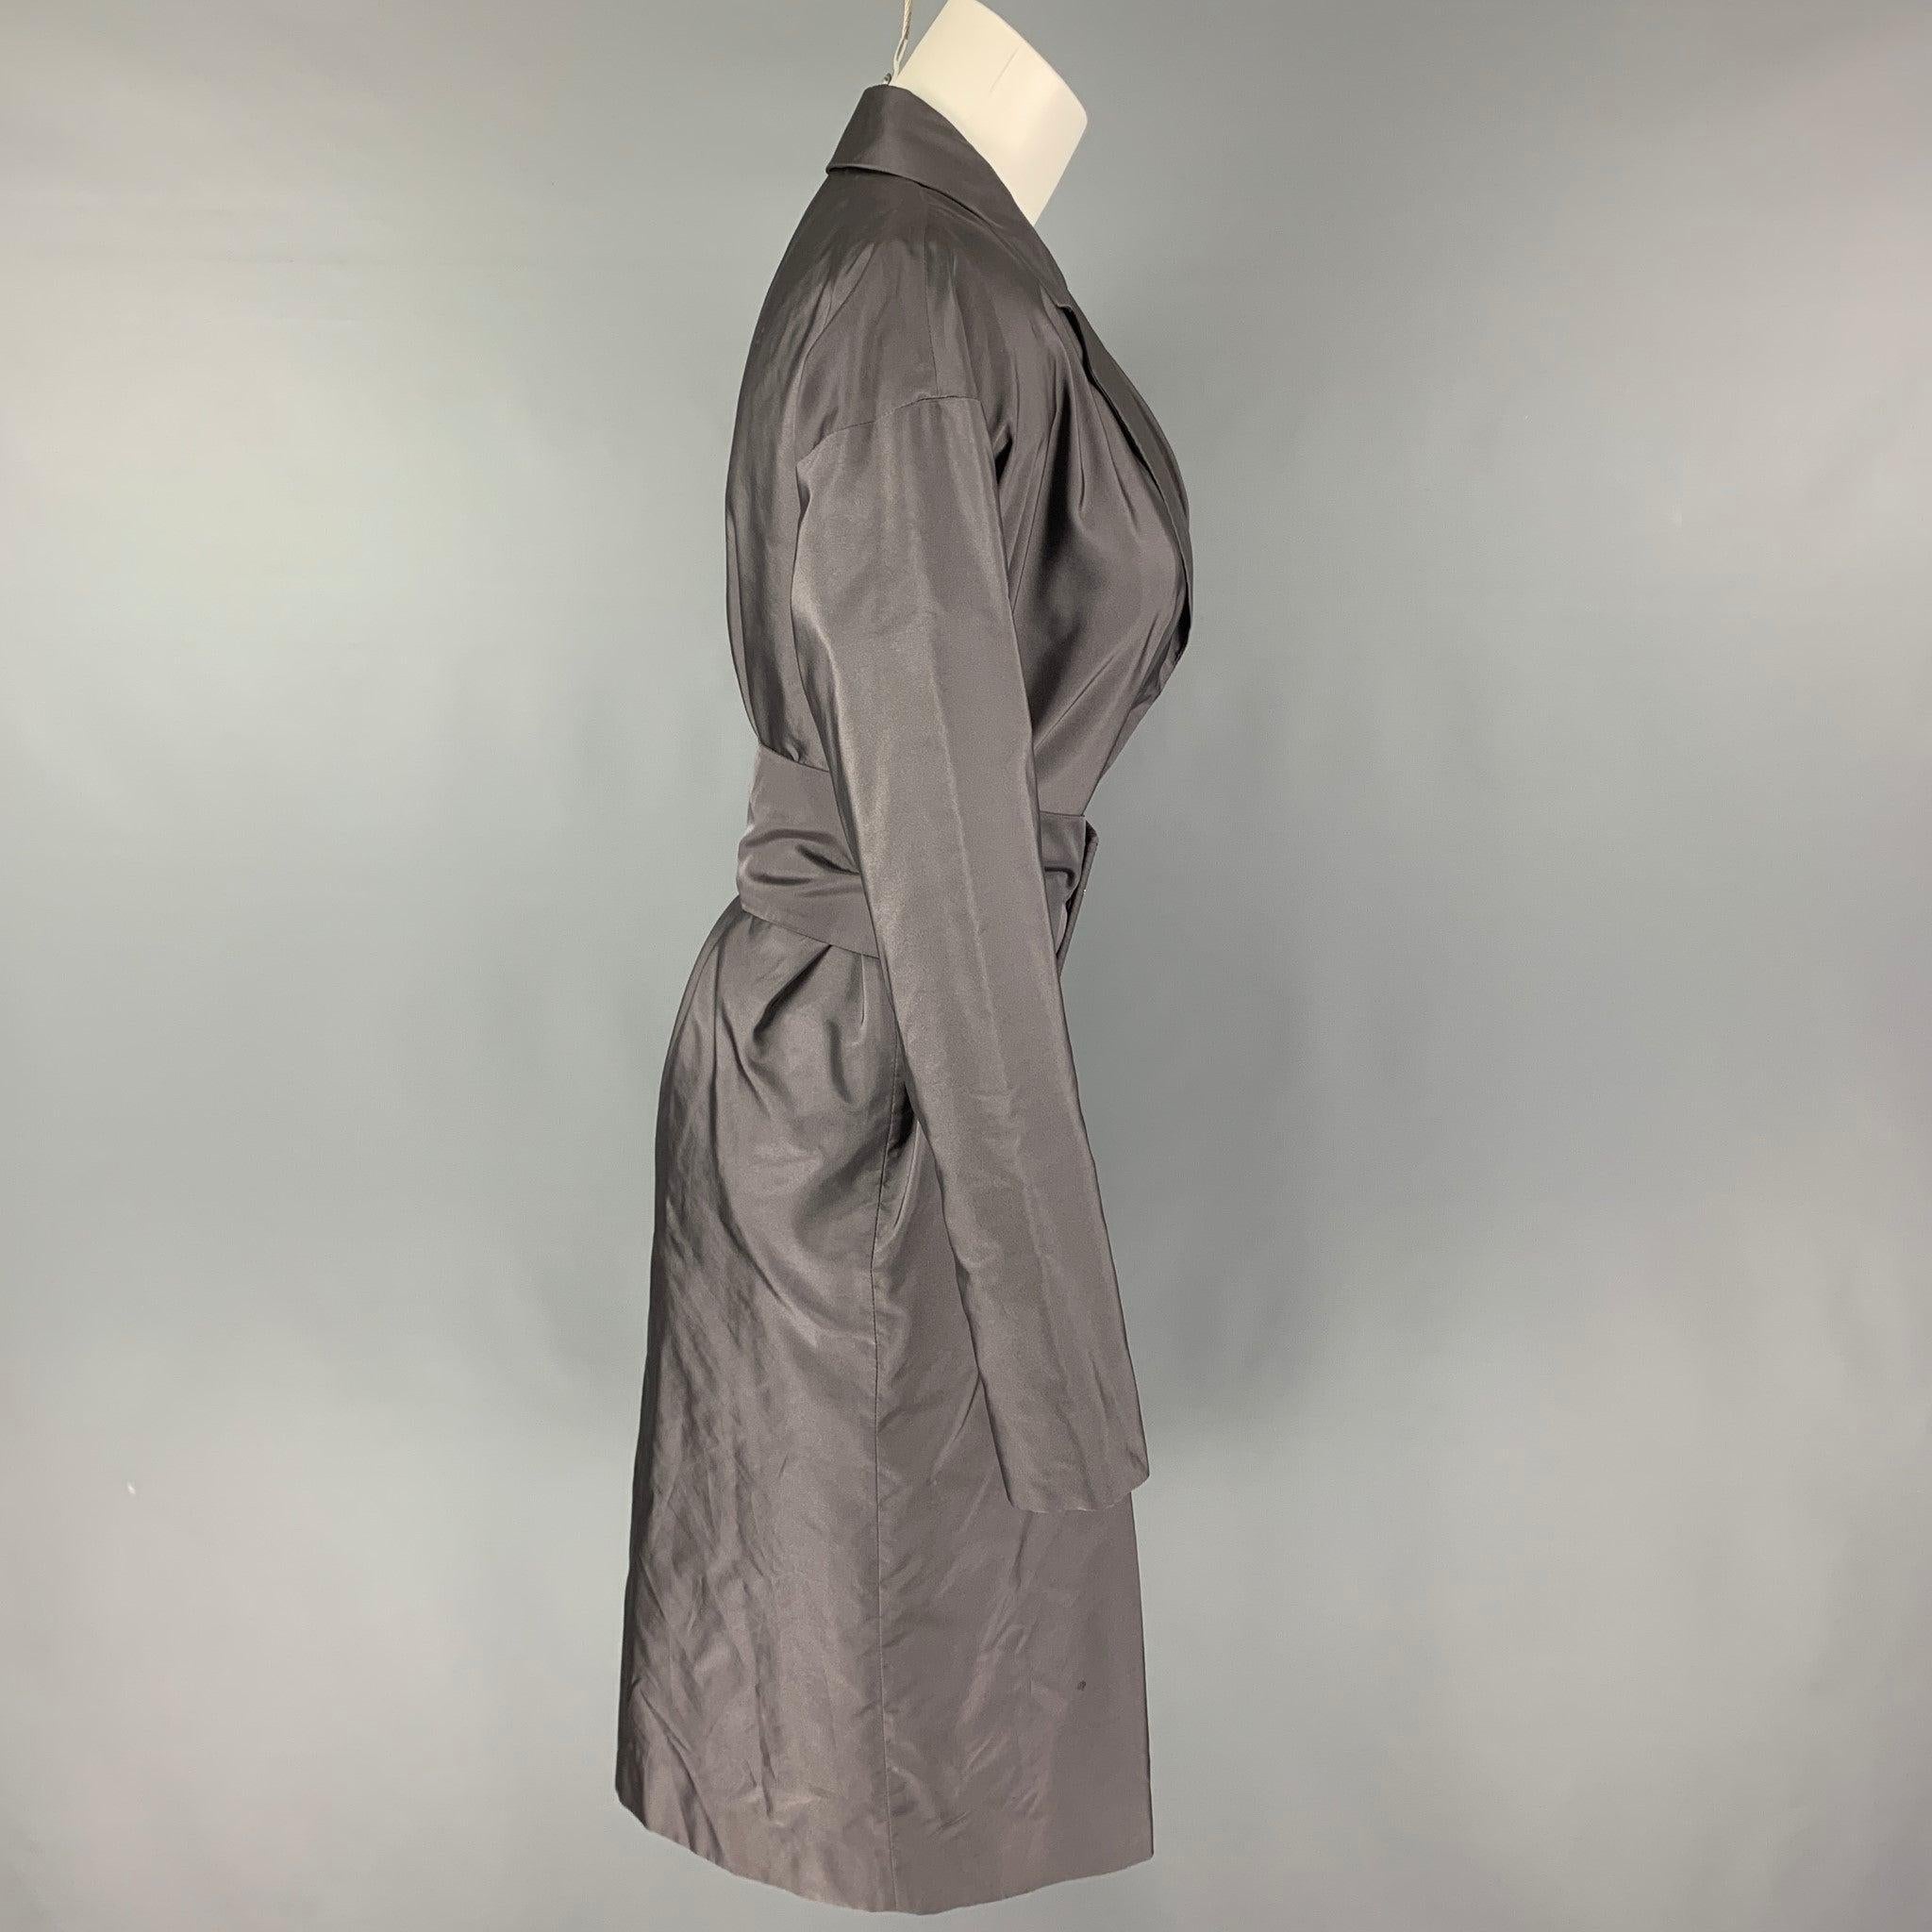 PRADA coat comes in a grey silk featuring a notch lapel, belted, and a hidden snap button closure. Made in Italy.
Very Good
Pre-Owned Condition. 

Marked:  40 

Measurements: 
 
Shoulder: 21.5 inches Bust: 40 inches Sleeve:
20.5 inches Length: 41